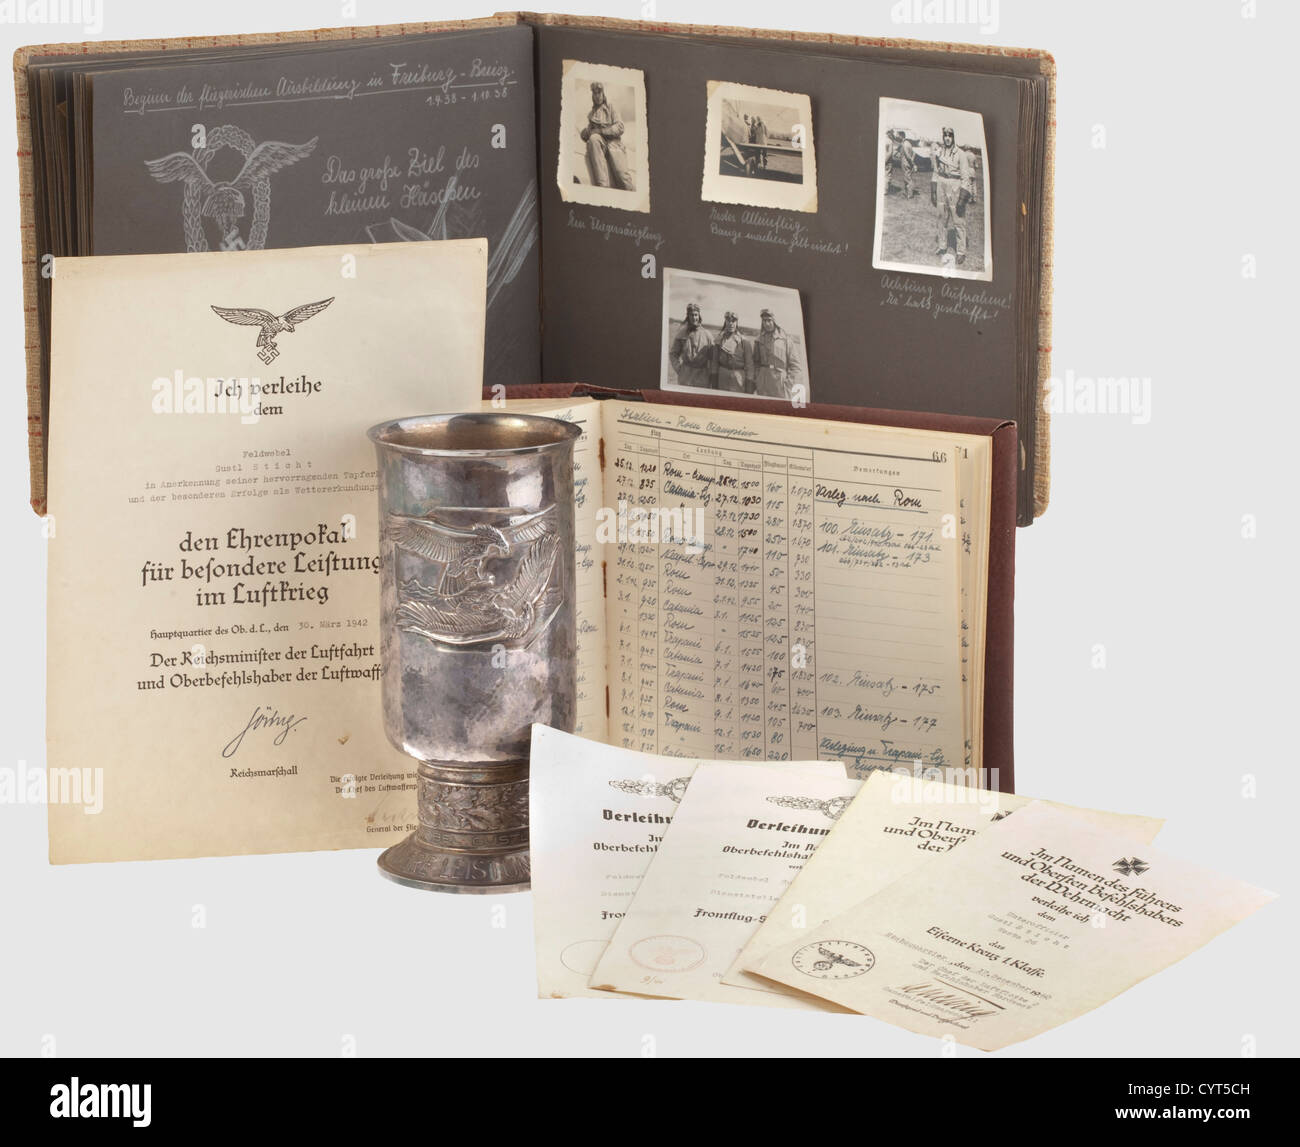 Legacy of pilot Gustl Sticht,a goblet of honour,certificates,a photo album,and a logbook of the "Westa 26"(the 26th weather recoinnaissance squadron)A goblet of honour for outstanding achievement in the air war,the Alpaka version,engraved,"Feldwebel Gustl Sticht am 30.3.42"(Sergeant 1st Class Gustl Sticht on 30 March 1942). Height 20.8 cm,slightly dented at the base. Certificates for the honour goblet on 30 March 1942 for success as a weather service pilot,for the Iron Cross 1939,both 2nd and 1st Class,while with the 26th weather reconnaissance sq,Additional-Rights-Clearences-Not Available Stock Photo